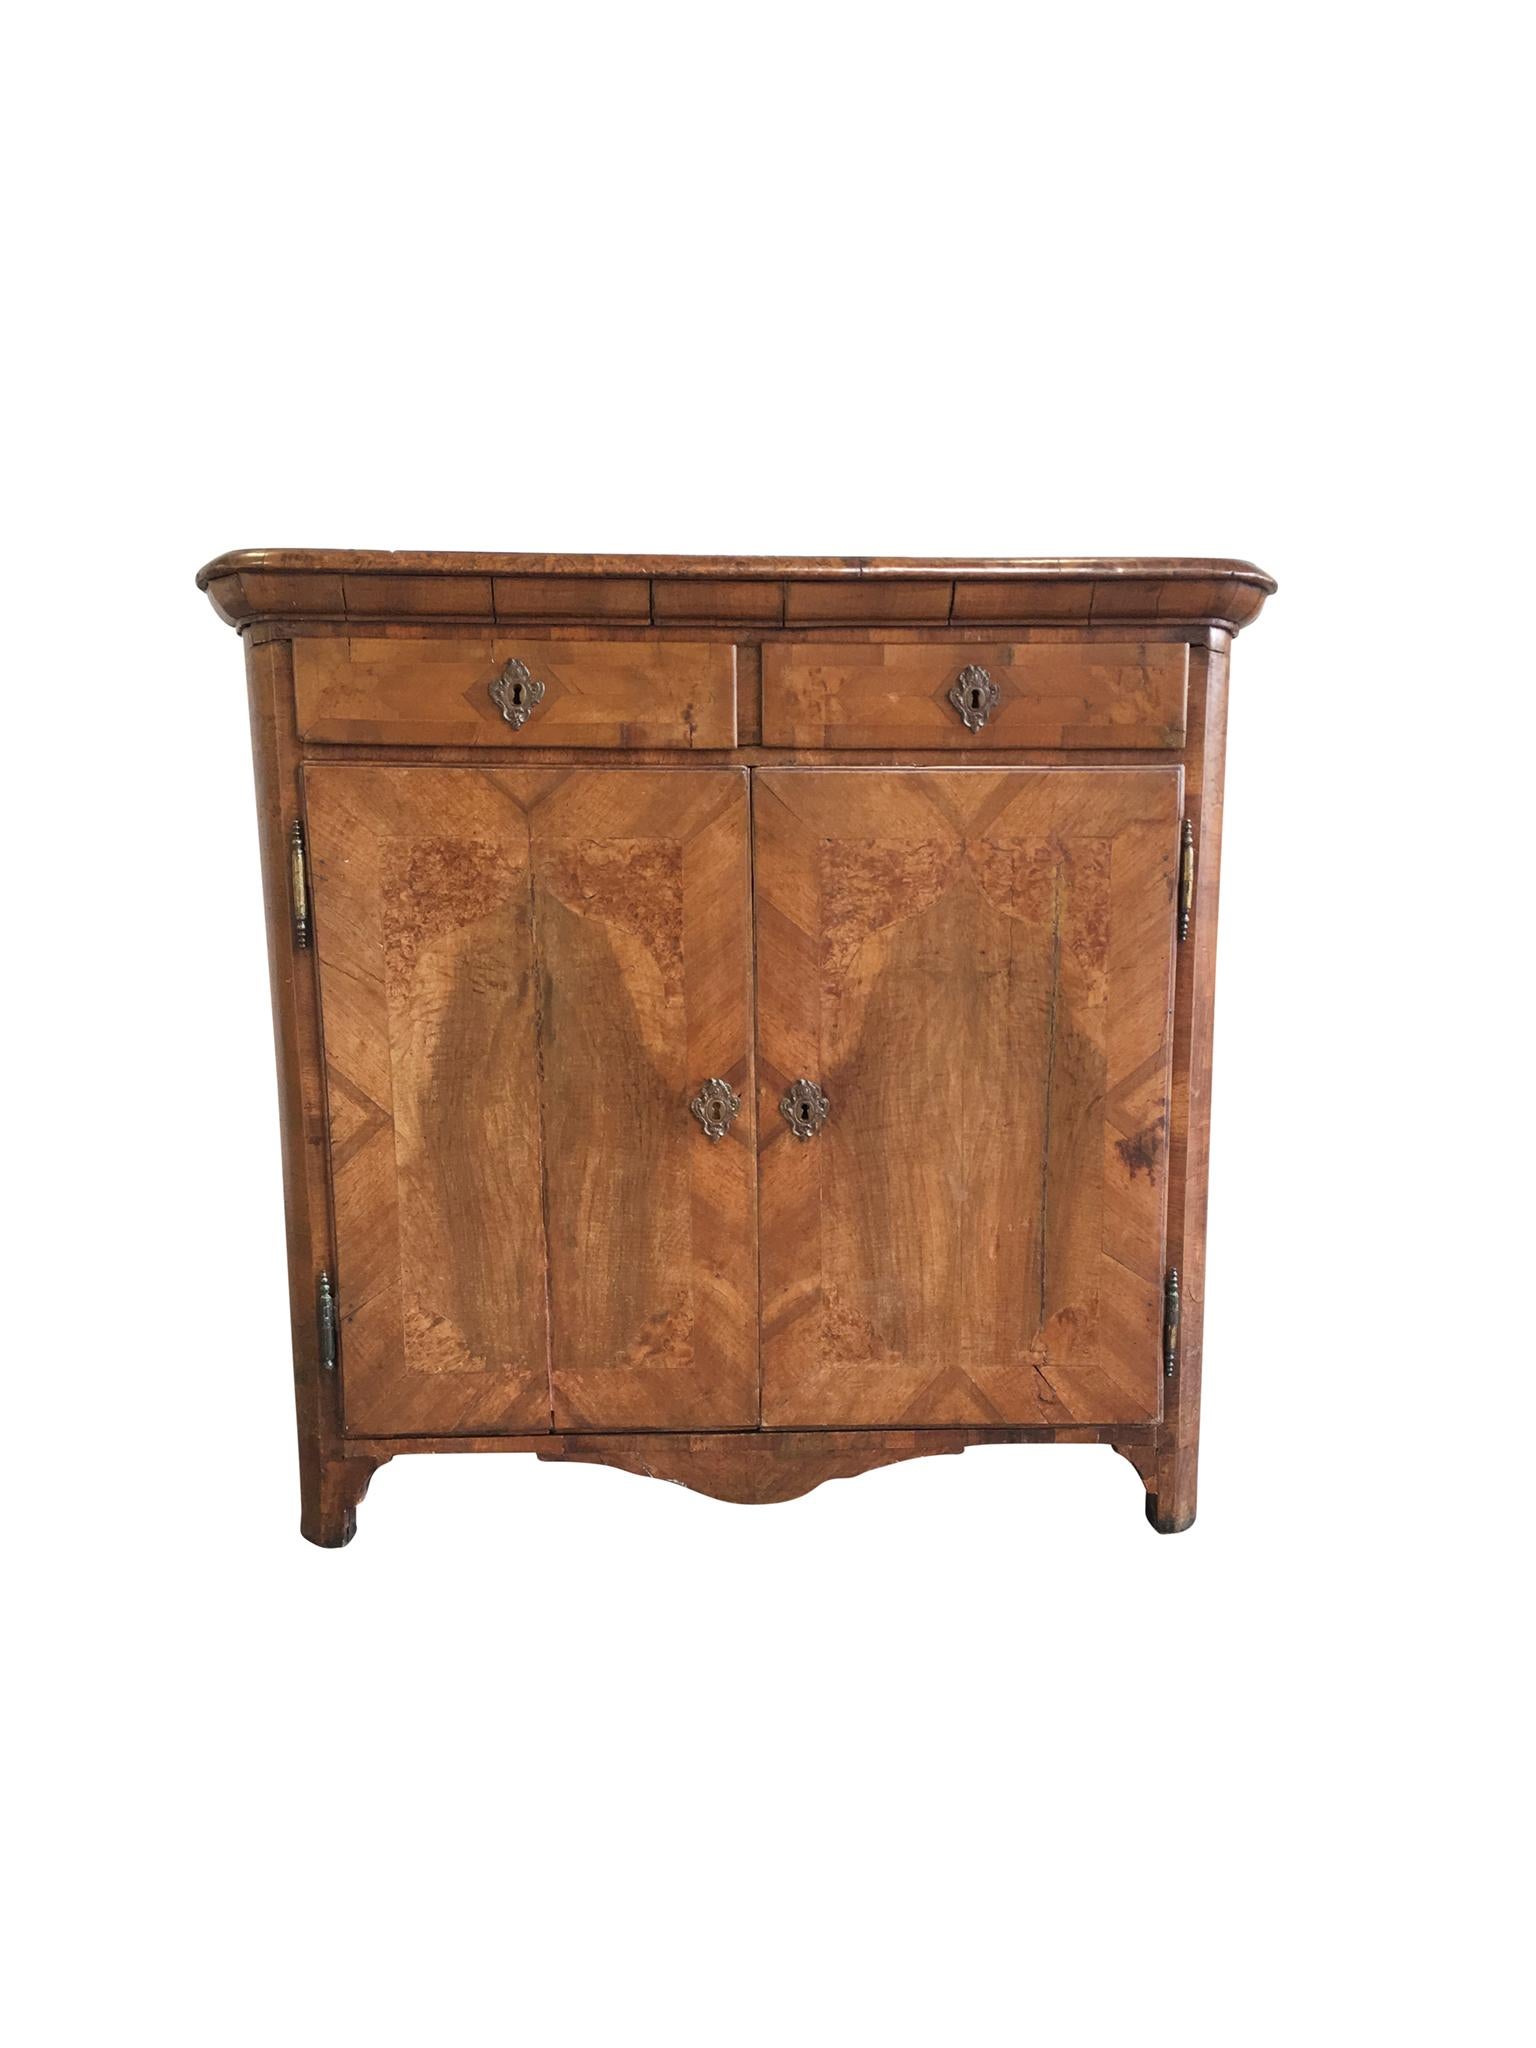 An exquisitely crafted 18th century Italian cabinet. It is comprised of walnut and olive burl wood that are expertly arranged into parquetry. The structural design of the cabinet is Neoclassical, elegant simplicity elaborated with beautiful